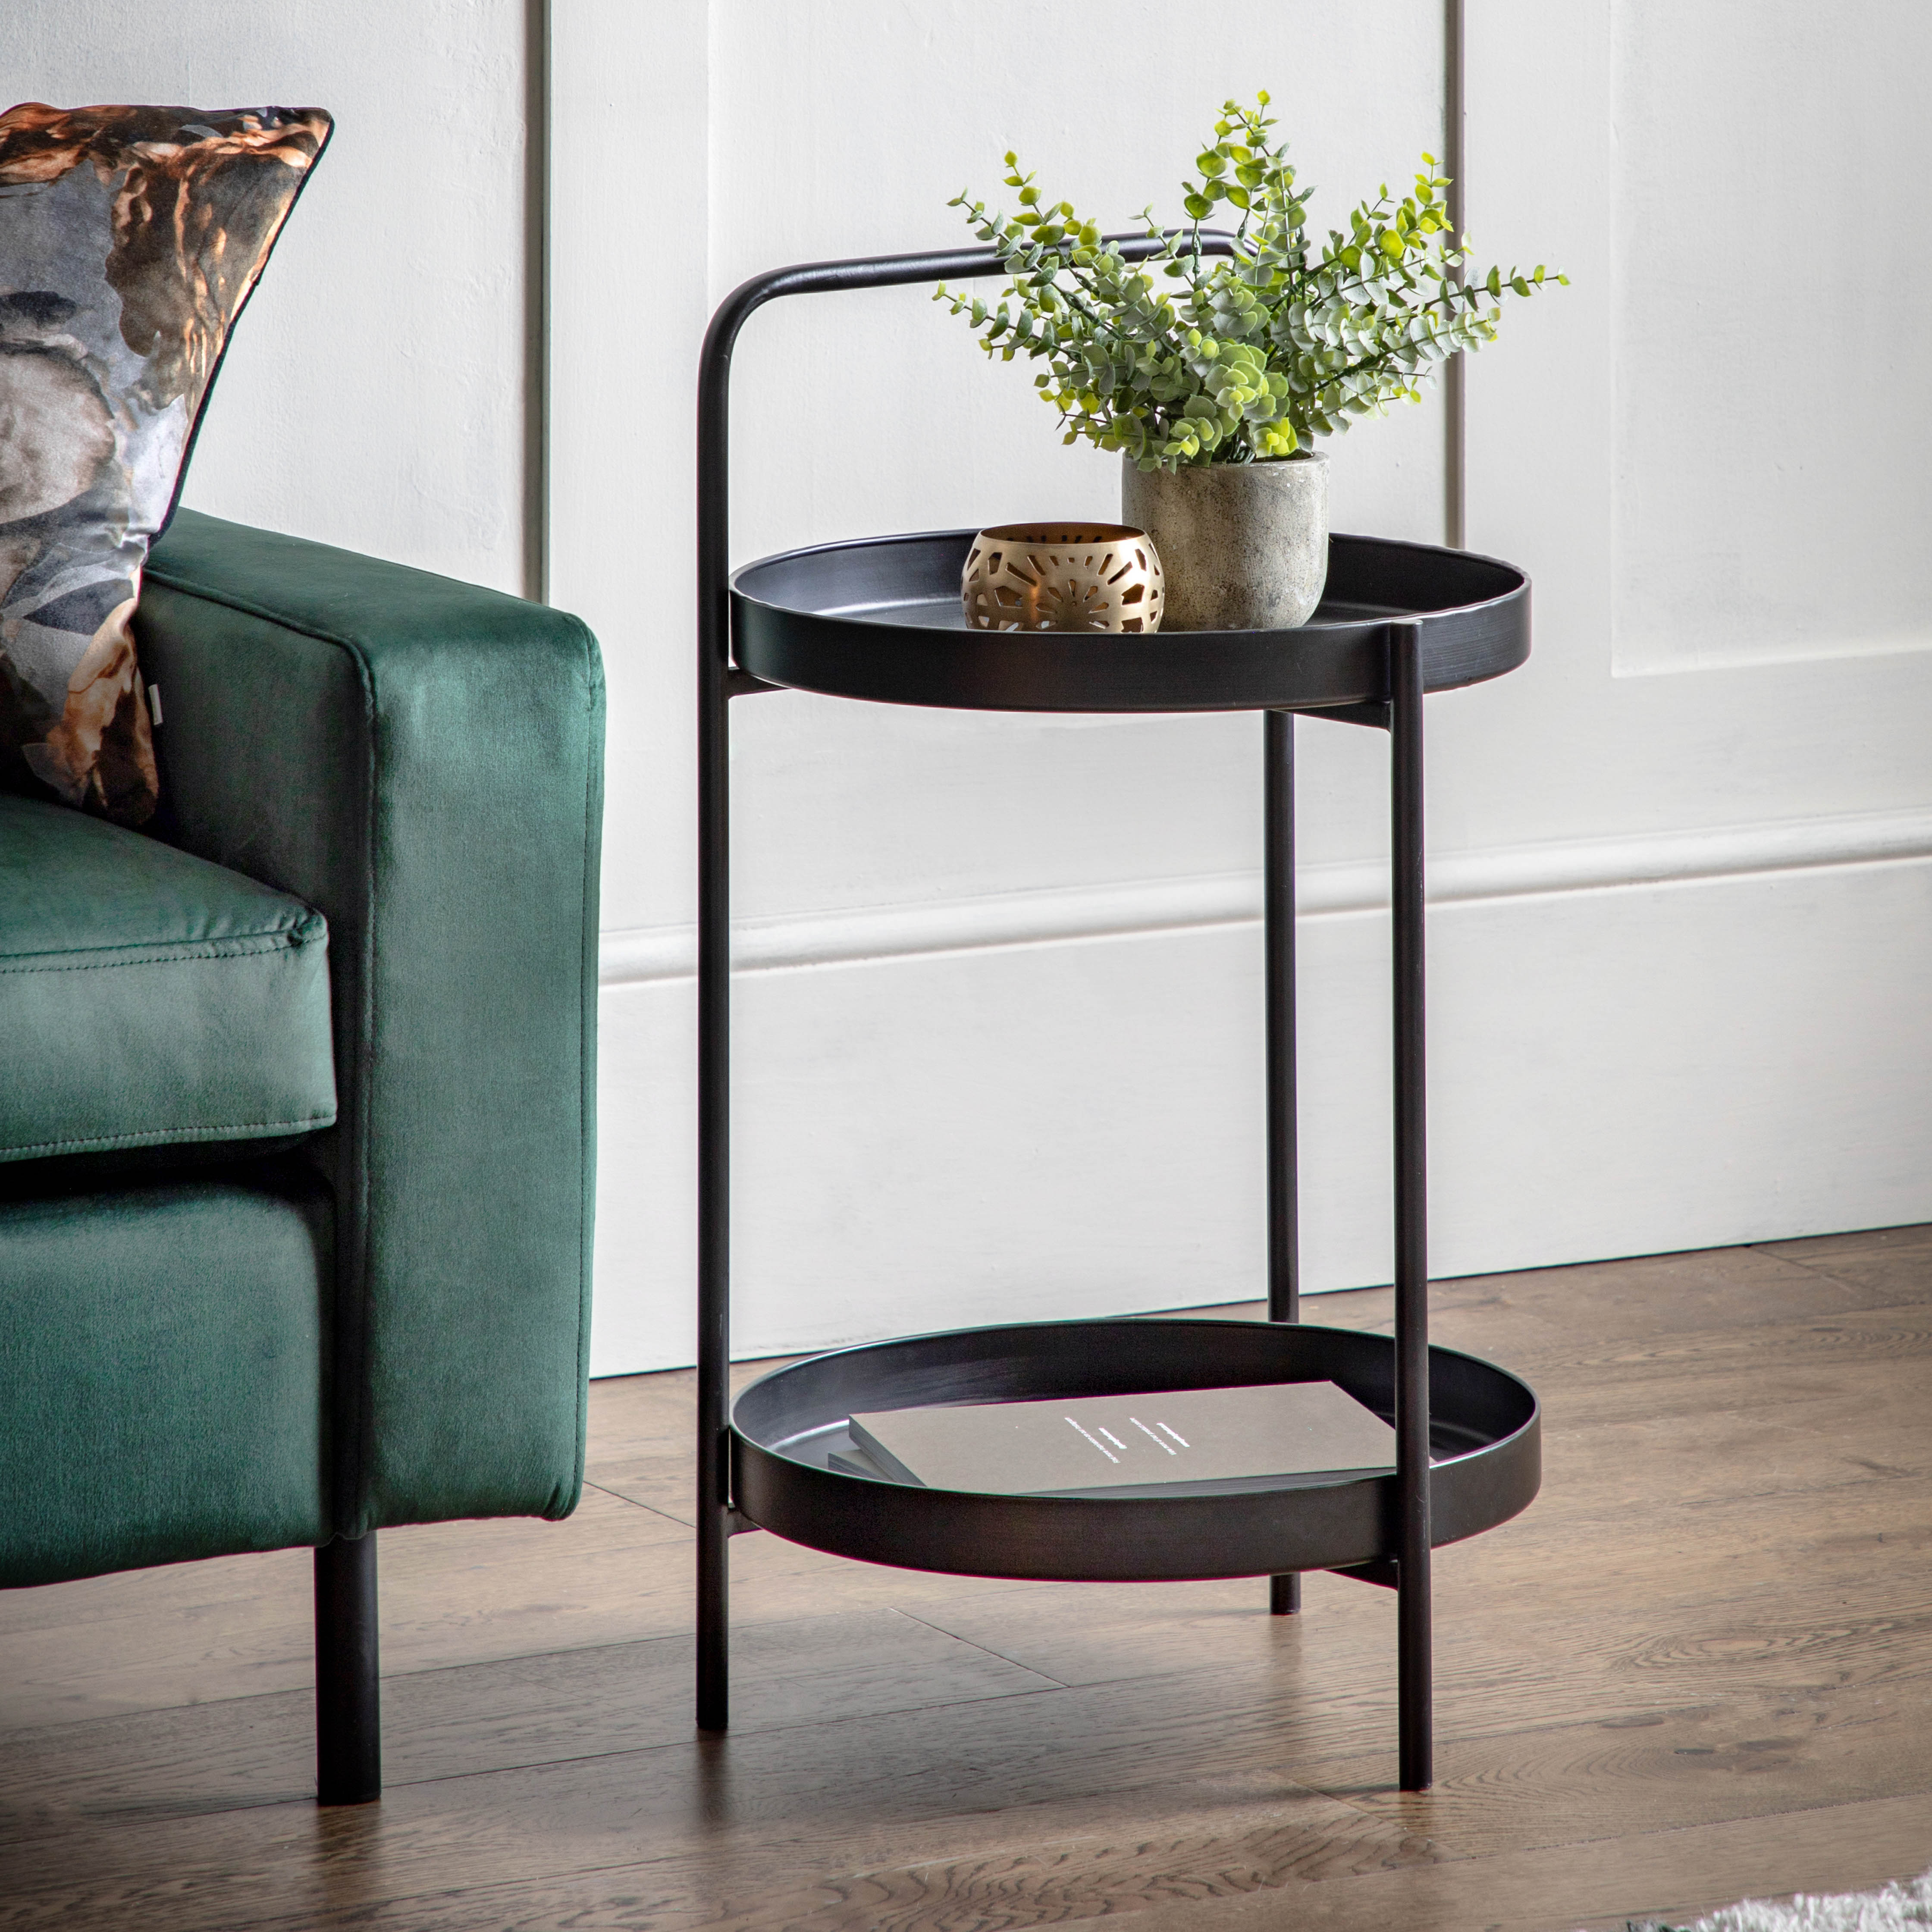 The Dunelm bath side table is the new must-have bathroom accessory